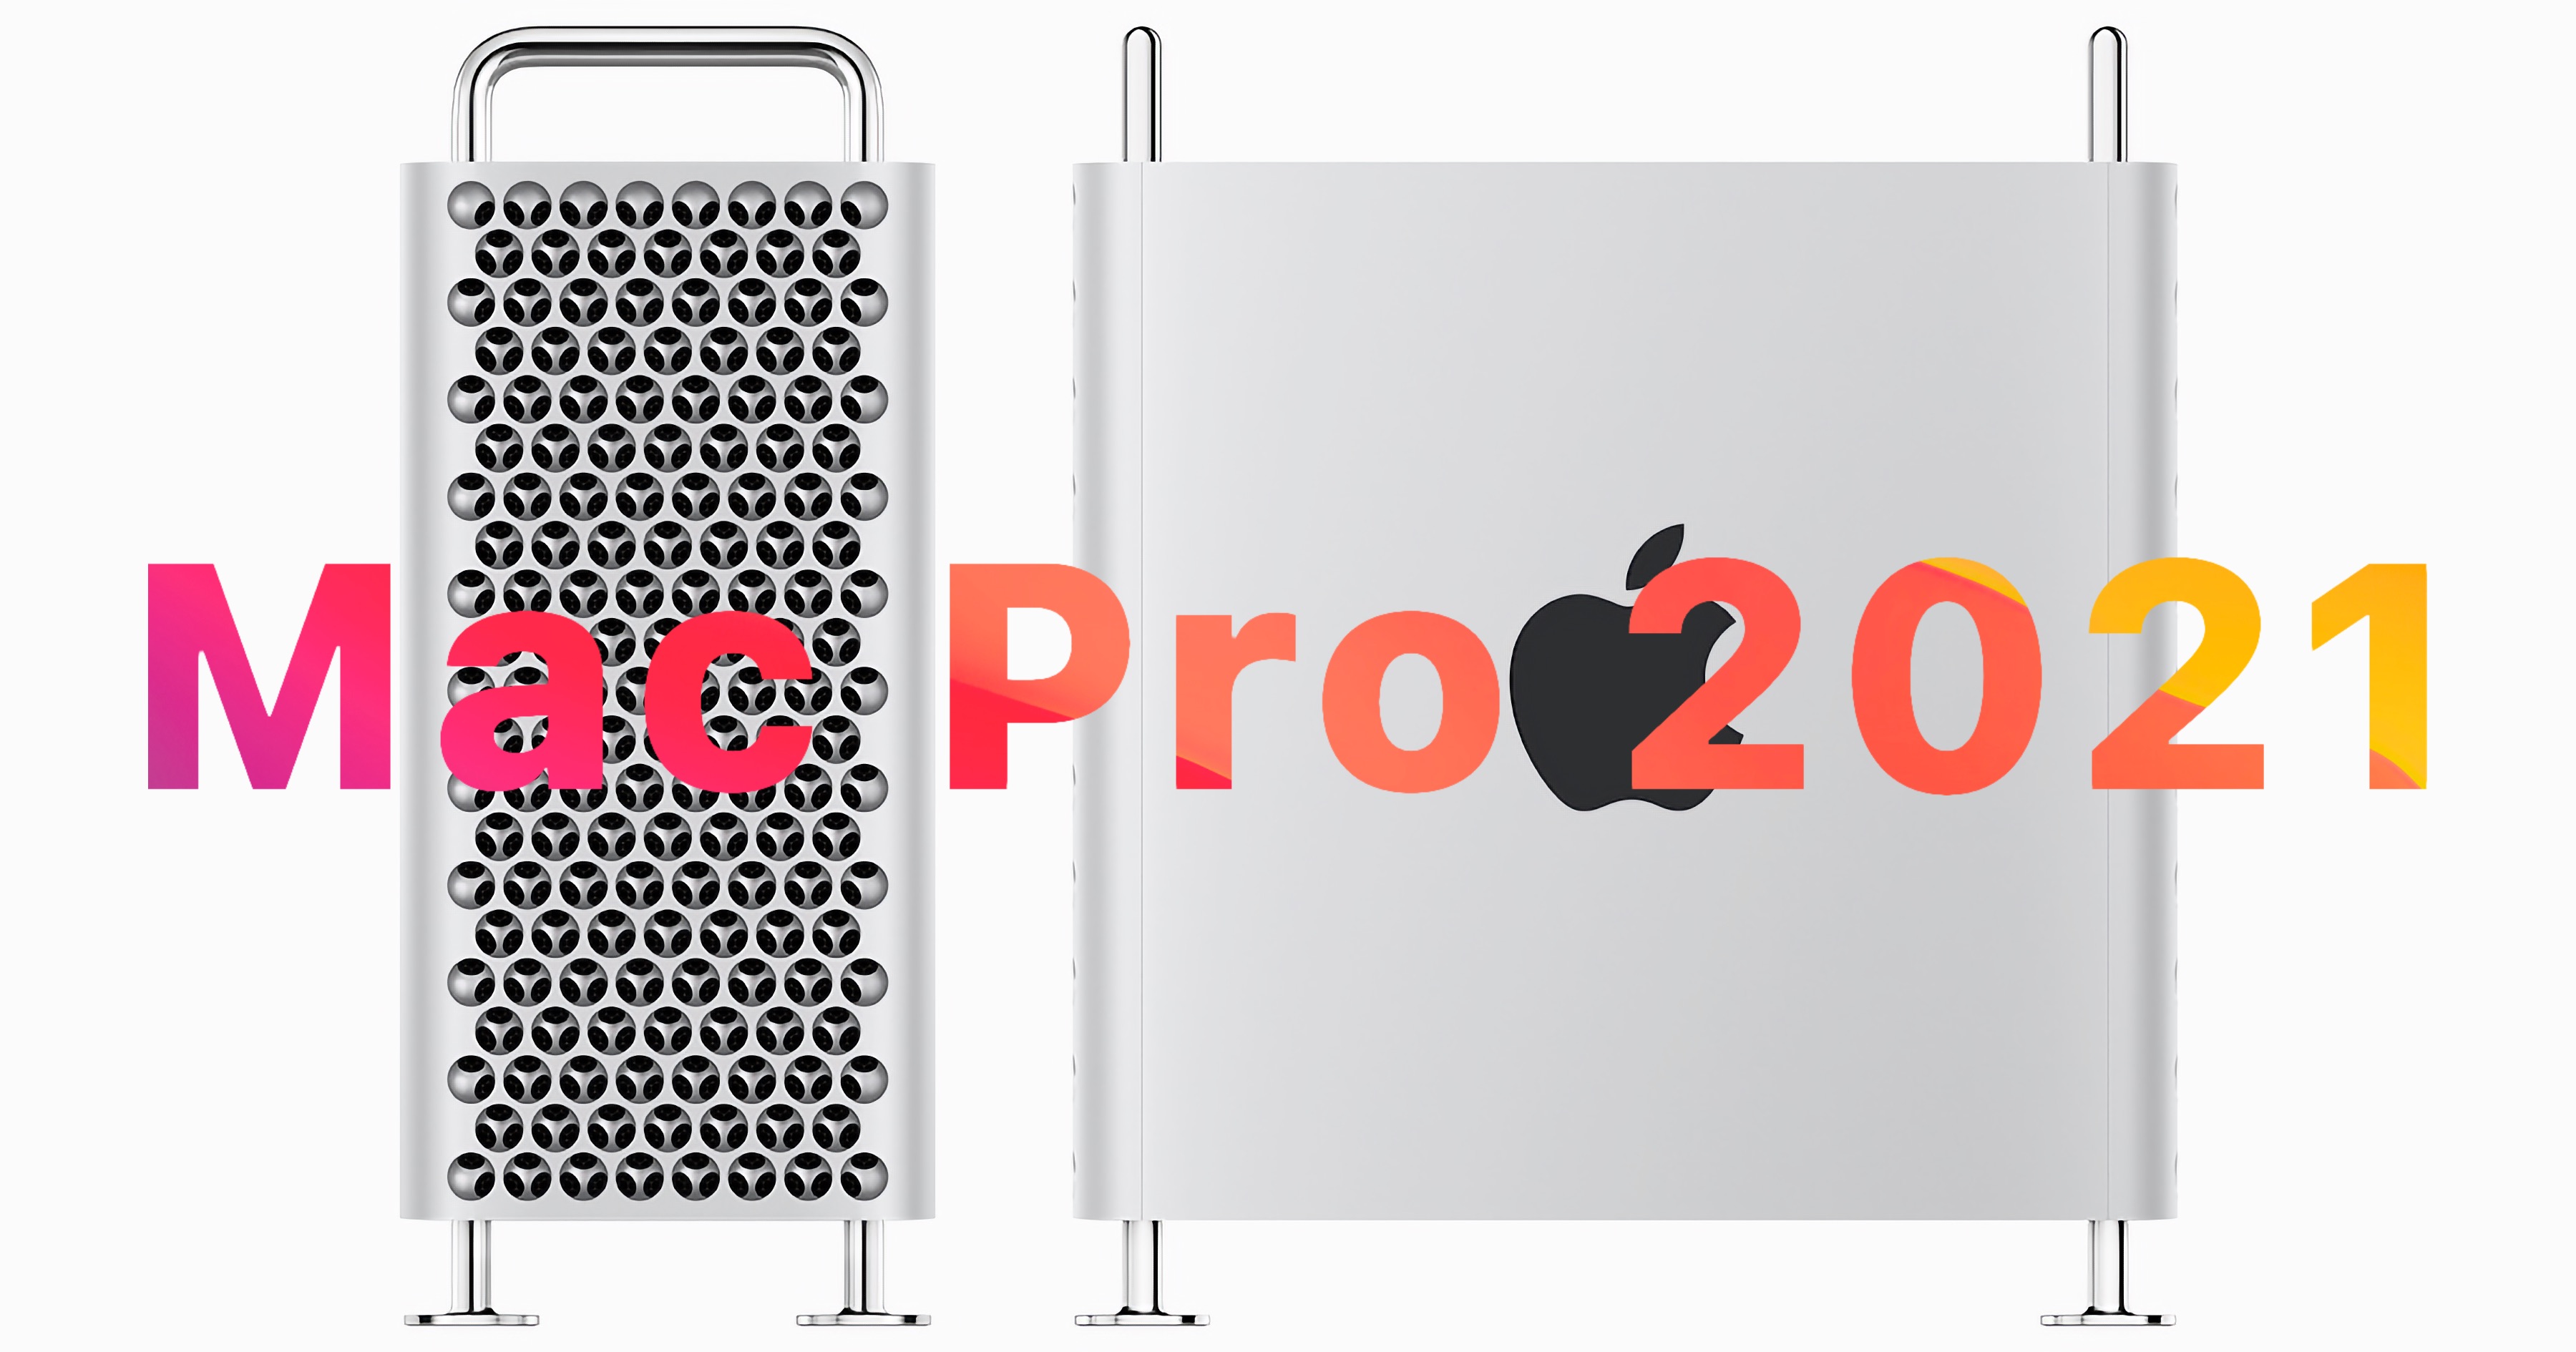 It's a silly graphic about 2021 Mac Pros!